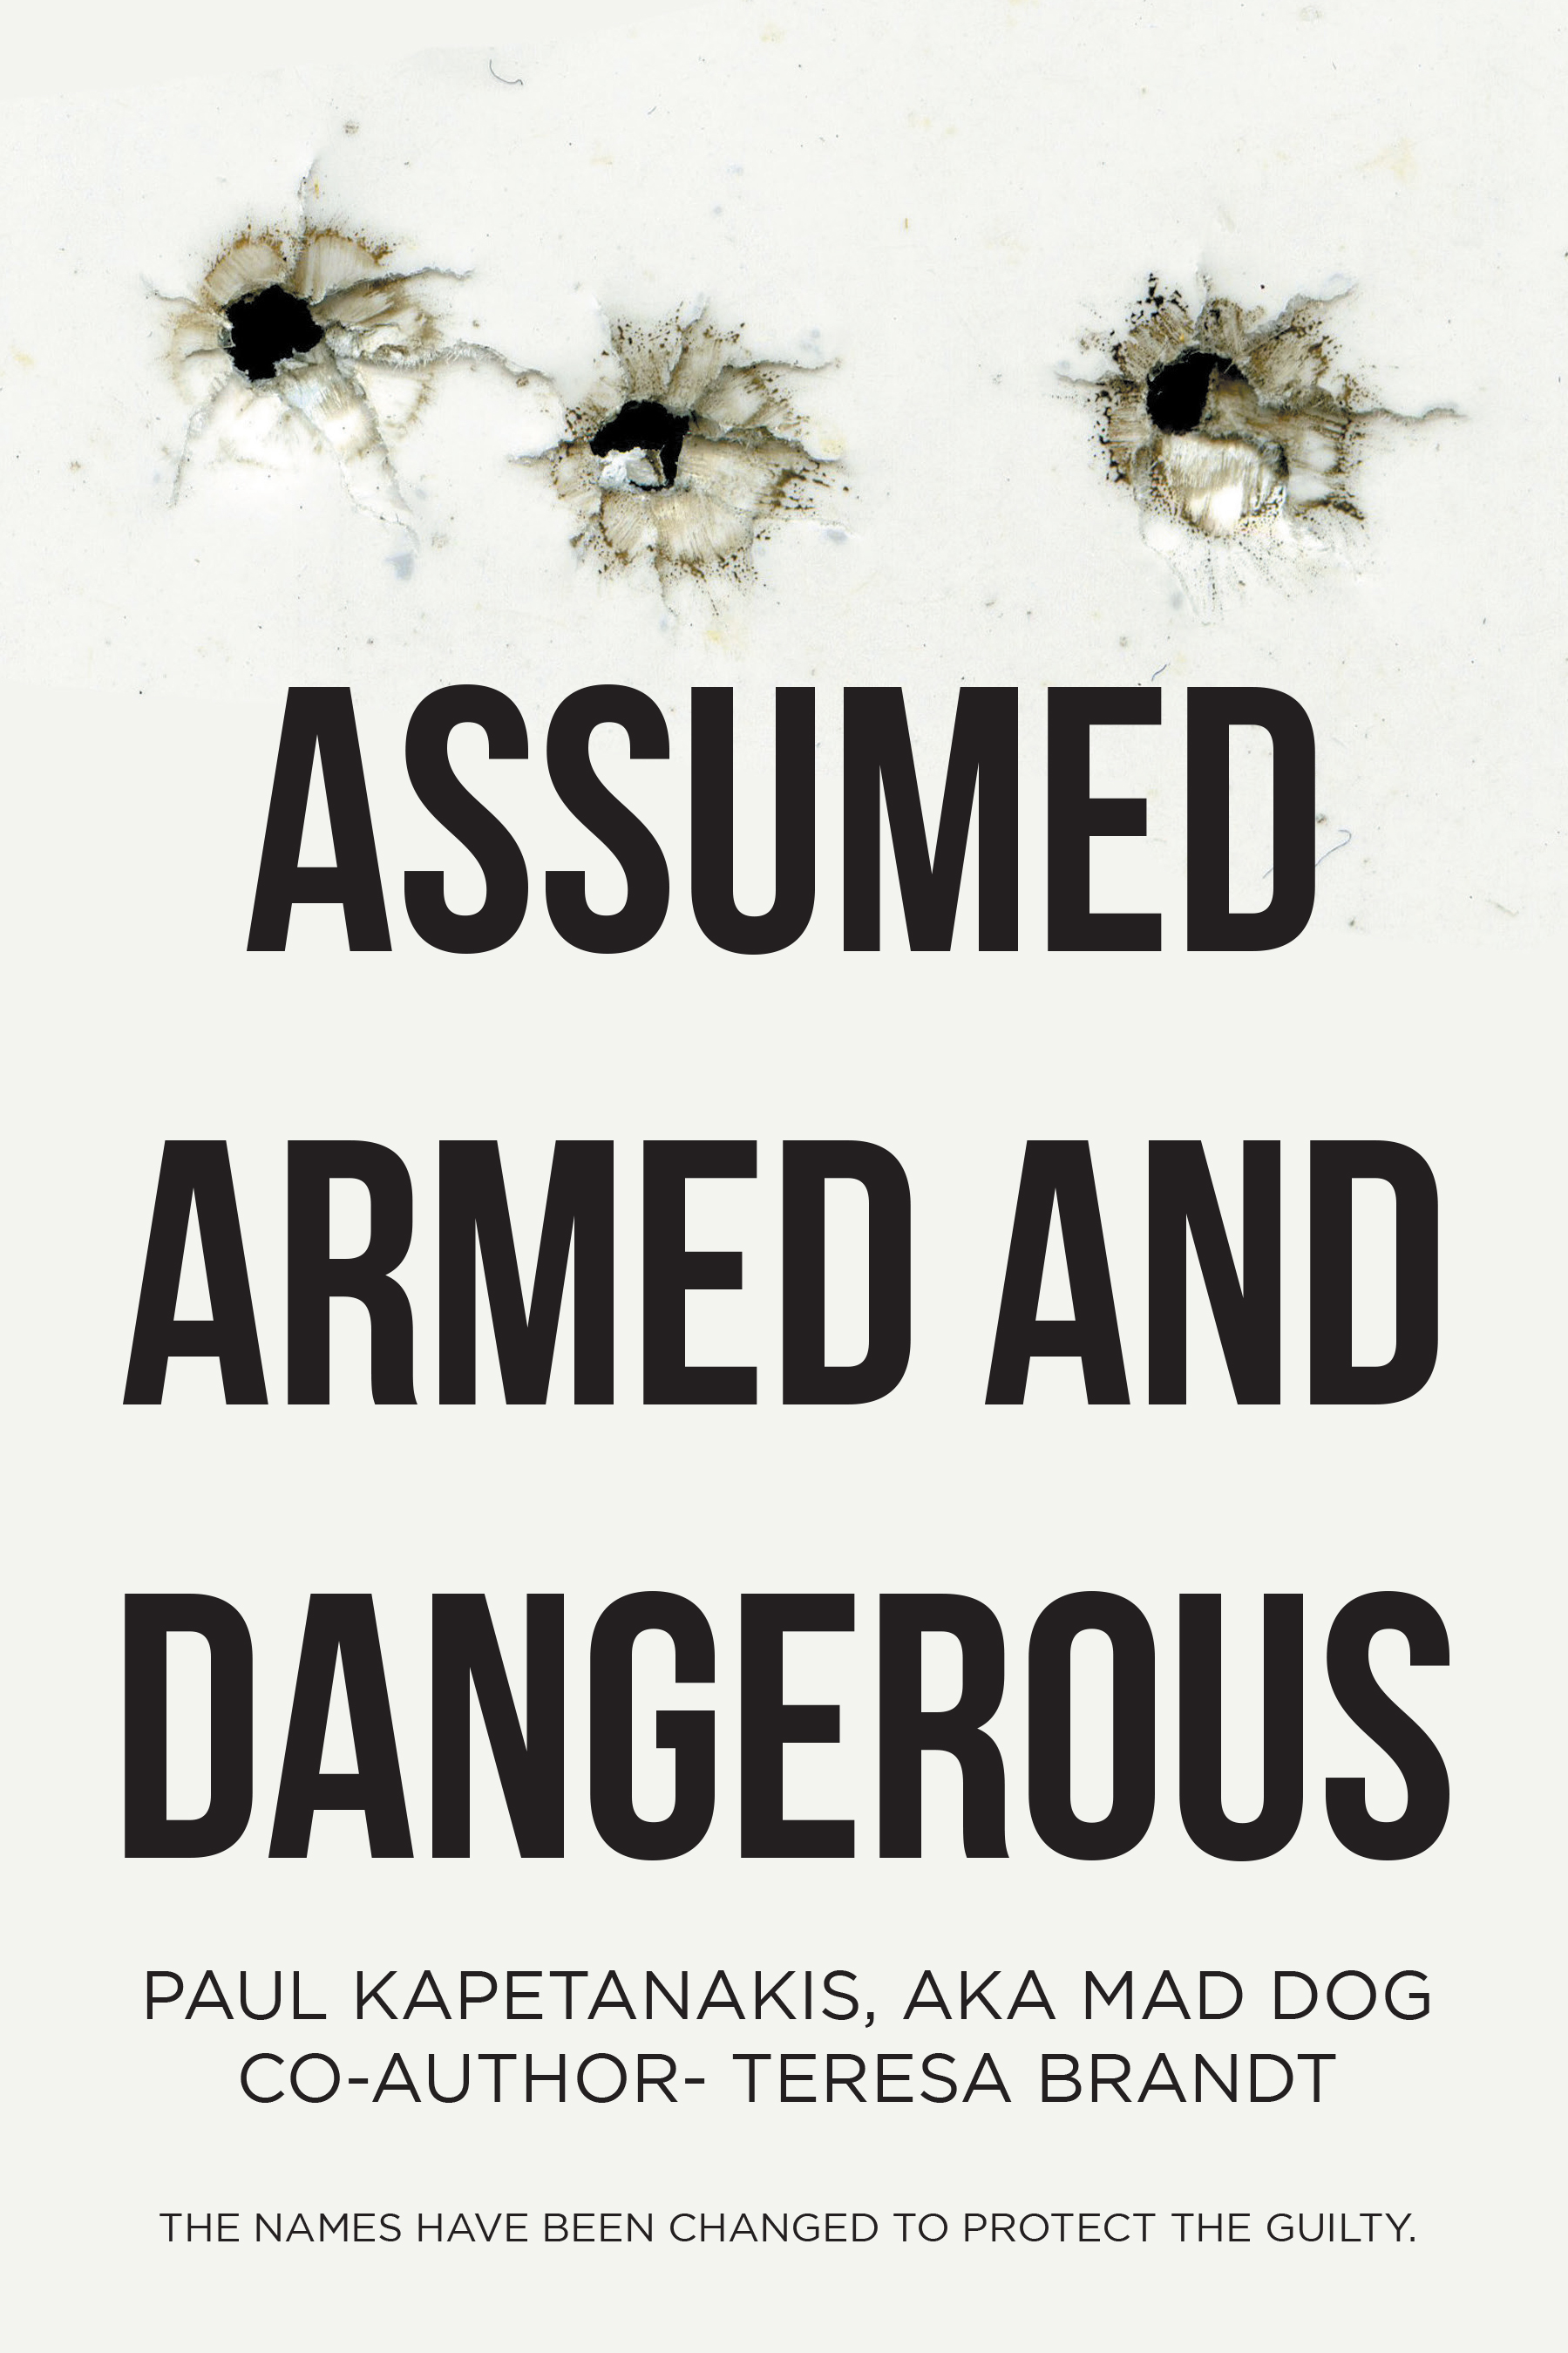 Author Paul Kapetanakis, aka Mad Dog, and Co-Author Teresa Brandt’s New Book, “Assumed Armed and Dangerous,” is an Inspiring Journey of Recovery and Healing